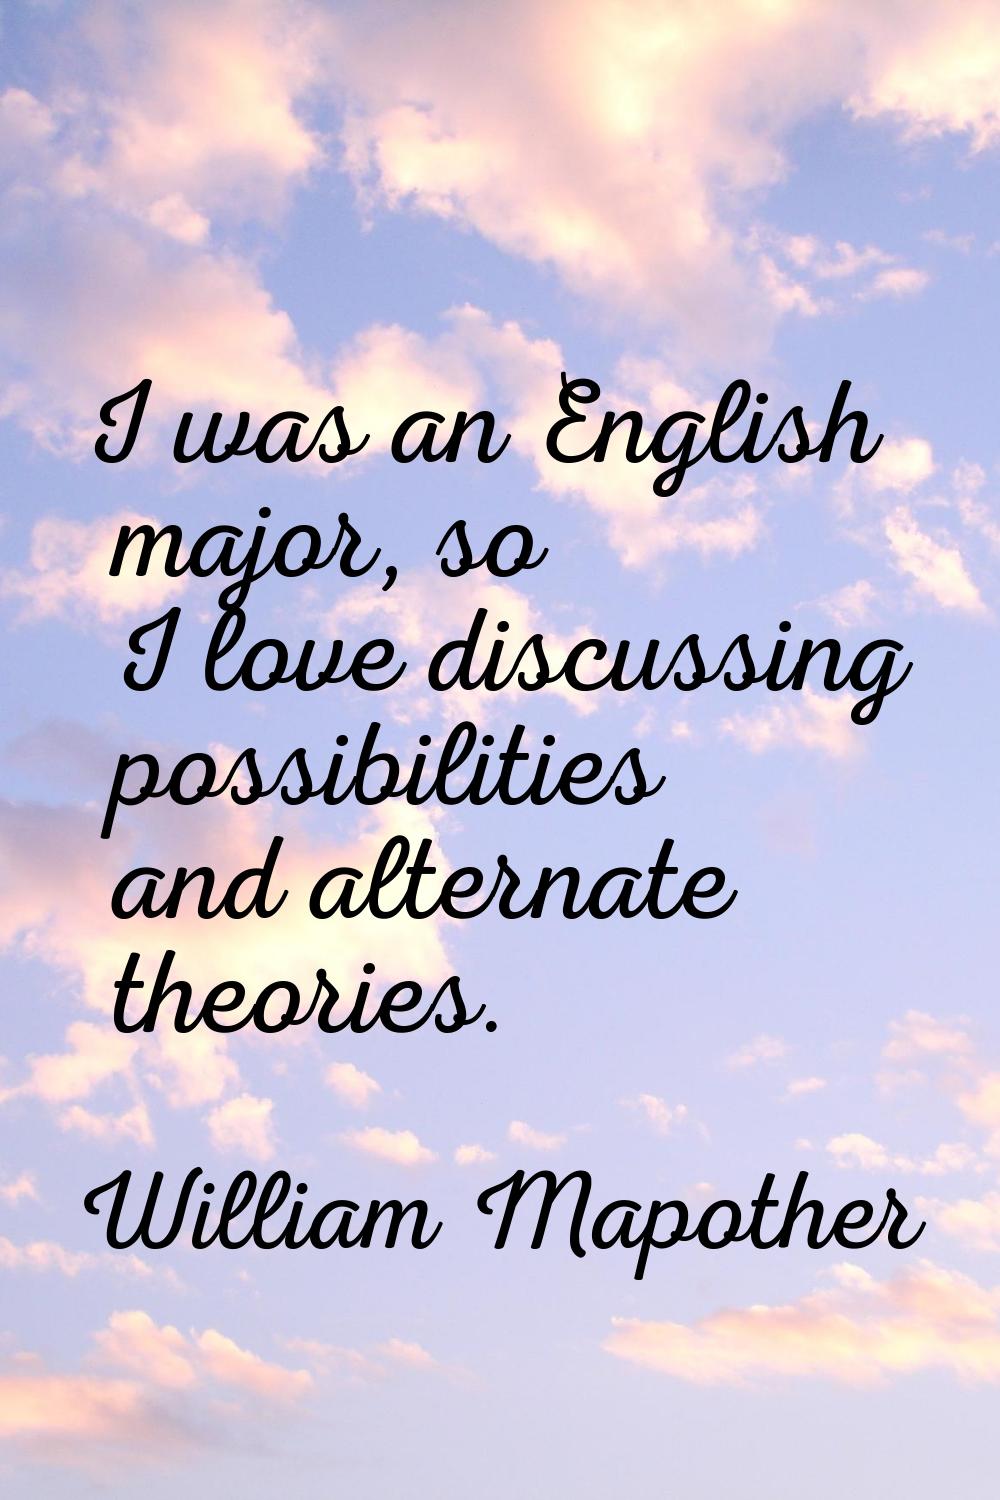 I was an English major, so I love discussing possibilities and alternate theories.